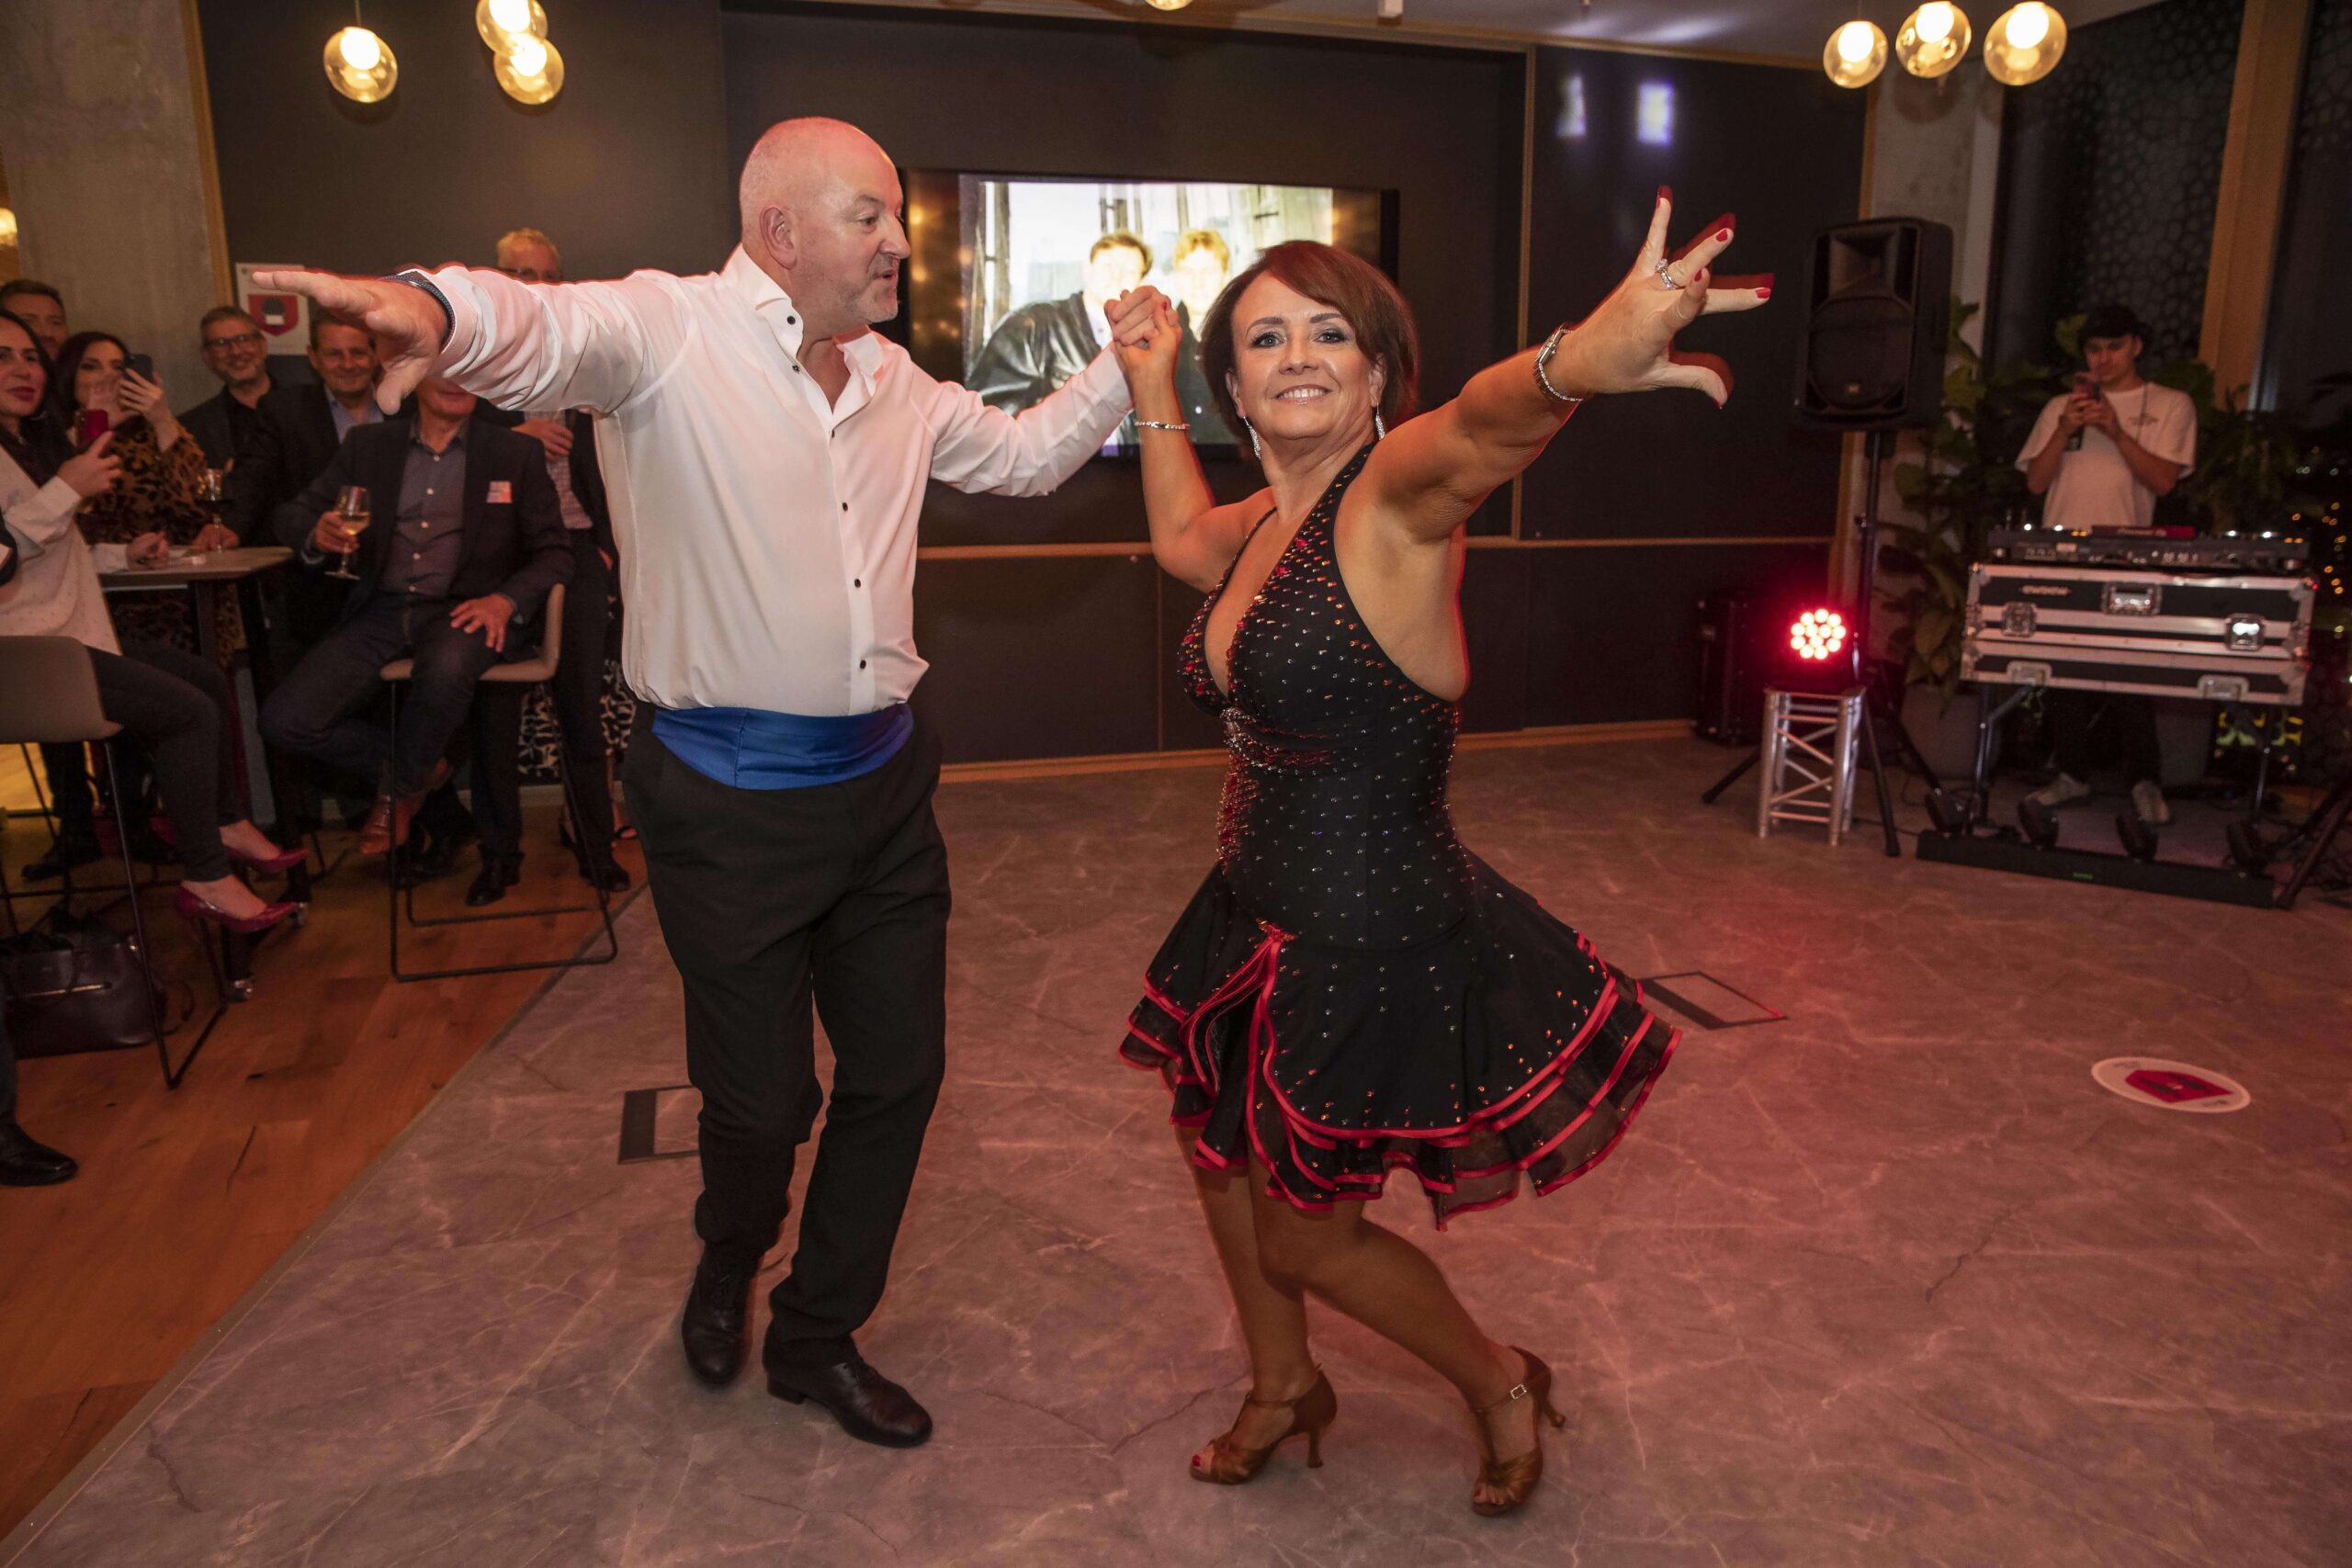 Sutcliffe director William Baldwin scoops top prize at dancing fundraiser, as event raises over £42,000 for Roy Castle Lung Cancer Foundation